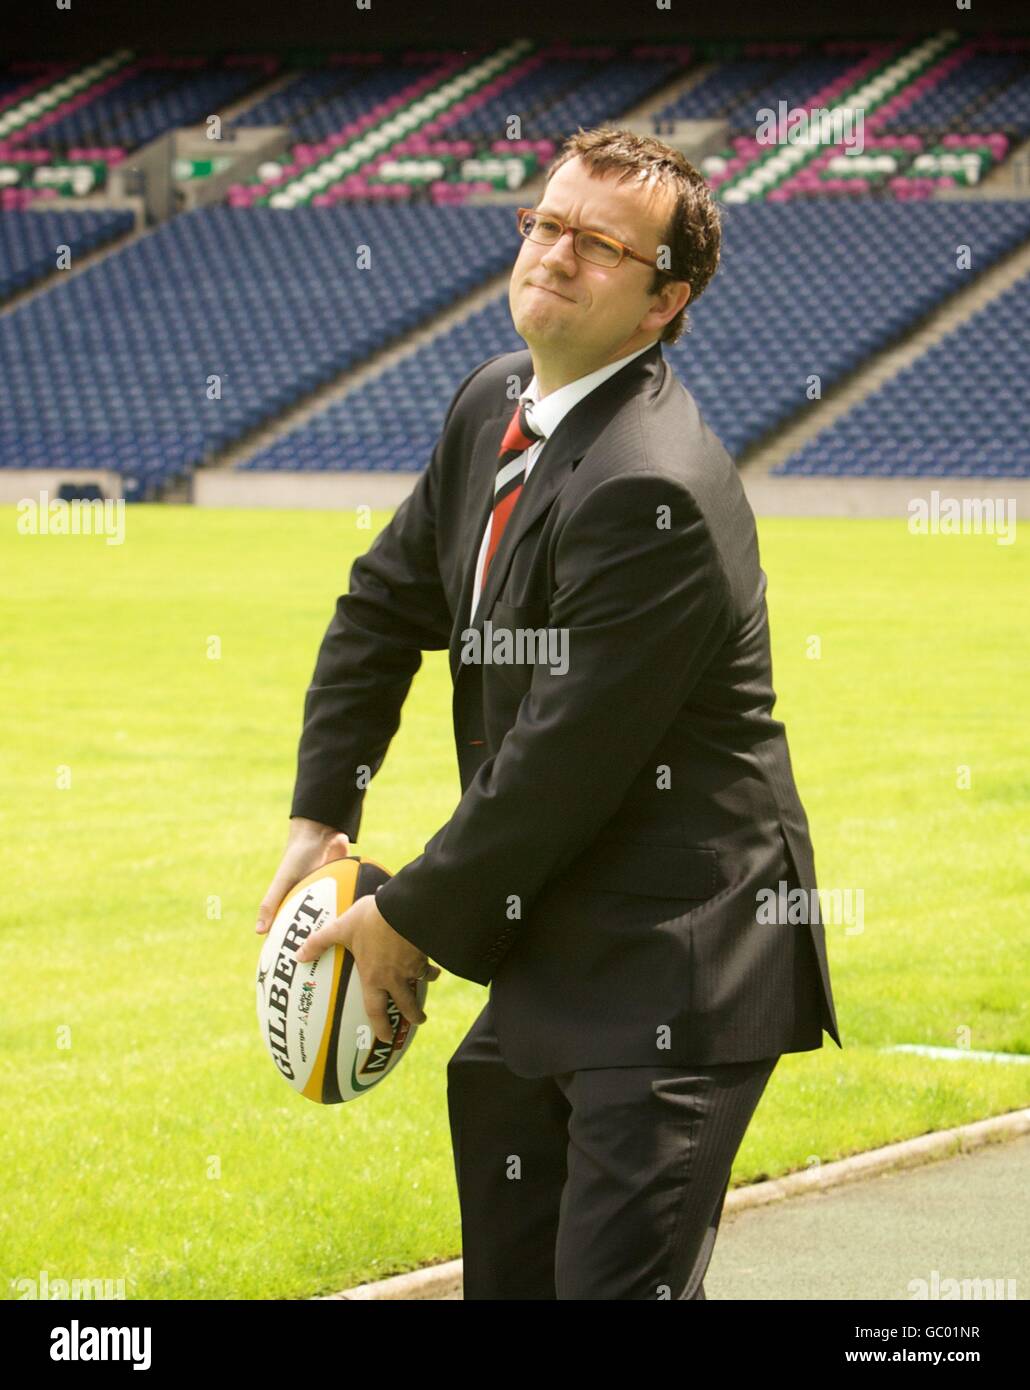 Rugby Union - SRU Announcement - Murrayfield Stock Photo